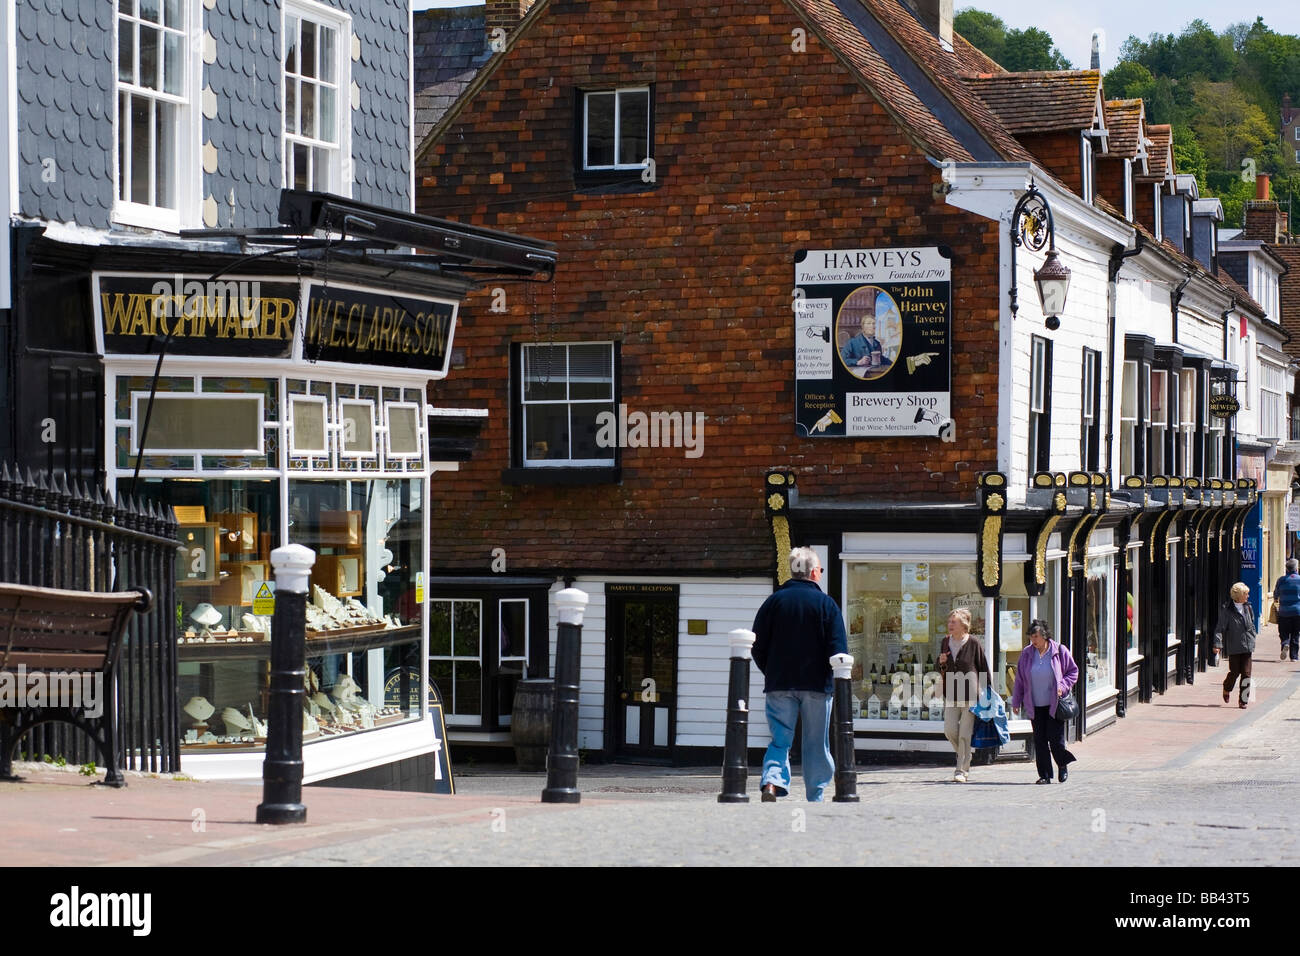 Cliffe High Street, Lewes, East Sussex, UK Banque D'Images